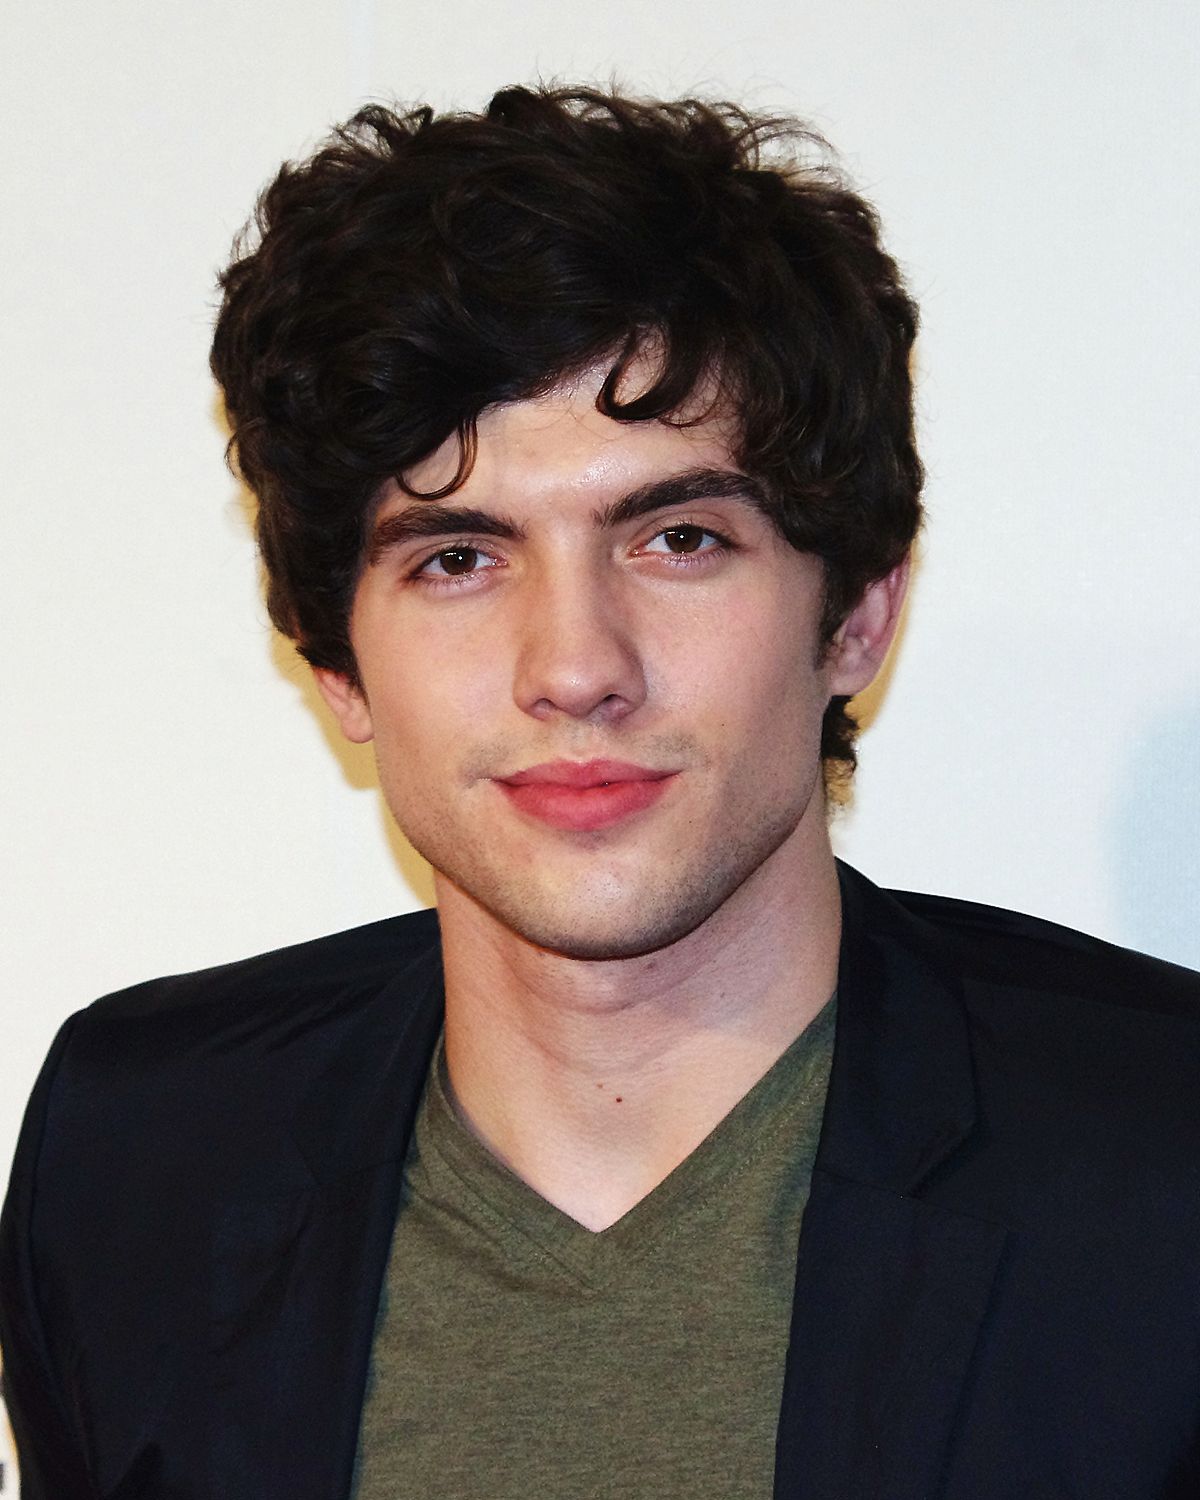 How tall is Carter Jenkins?